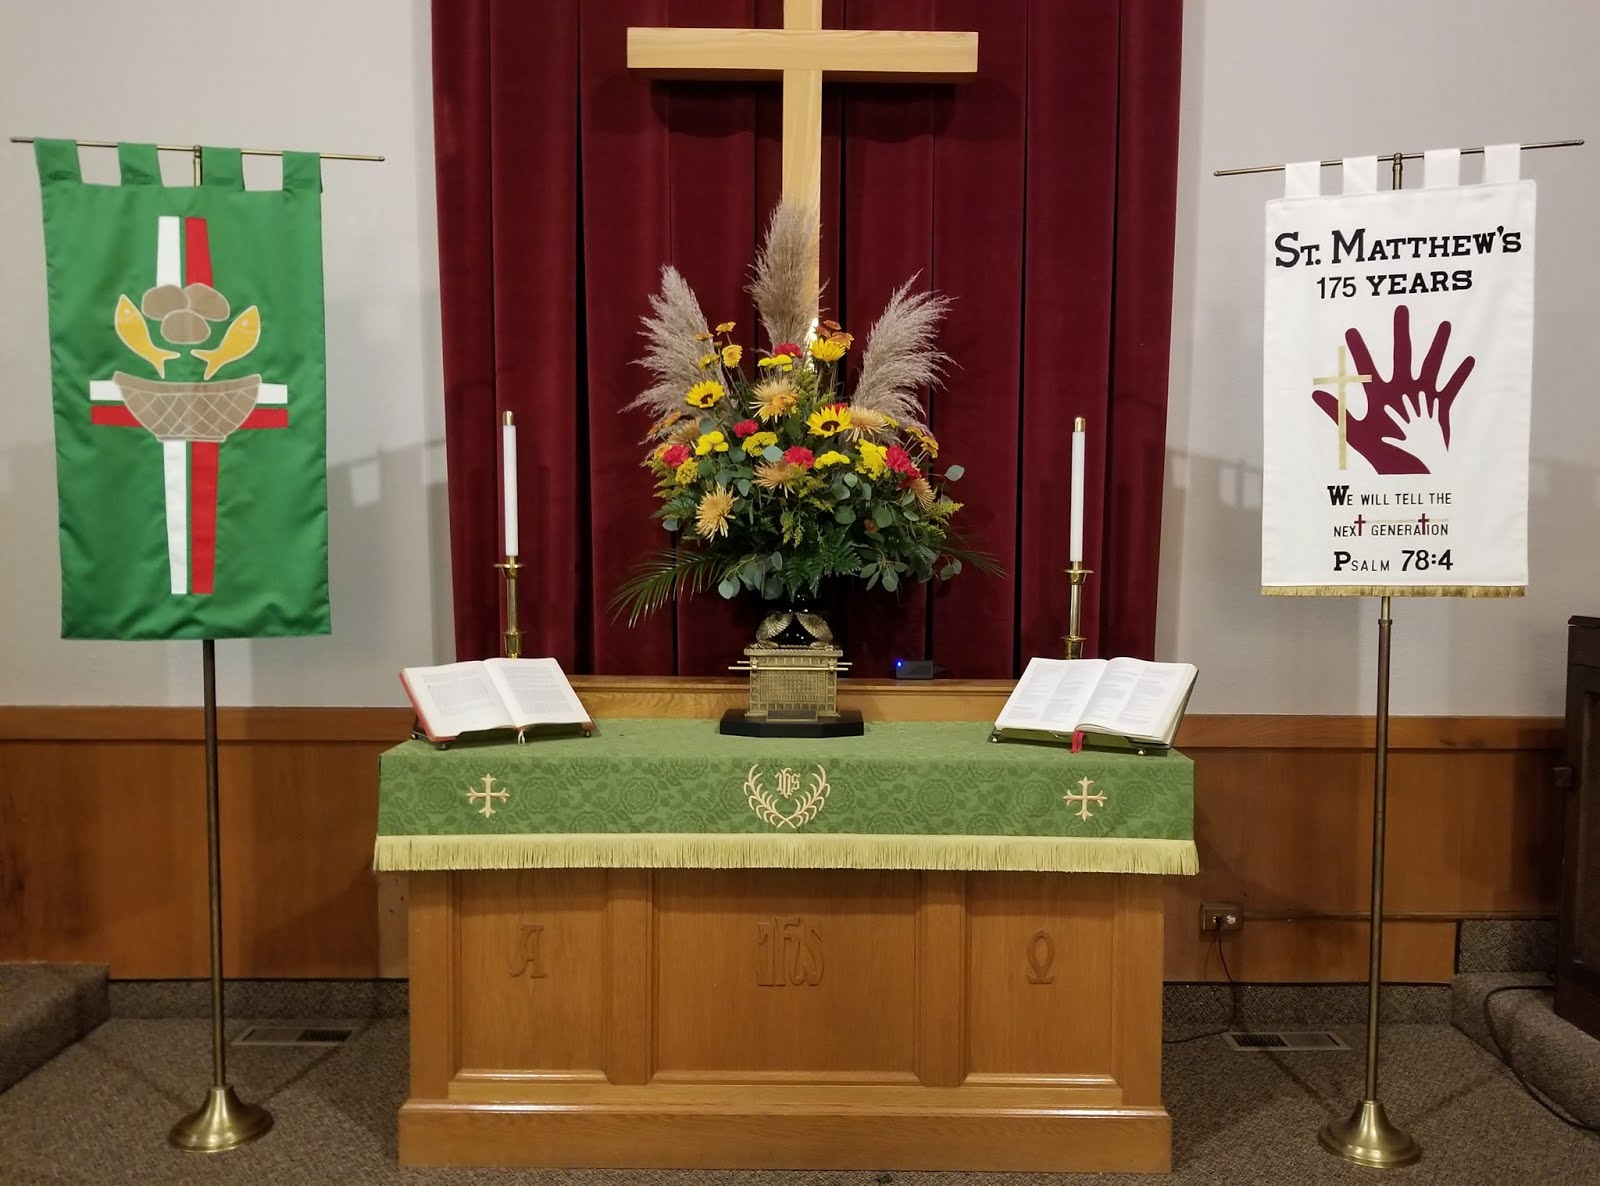 Our 175th Anniversary Celebration was Sunday, Sept 29, 2019